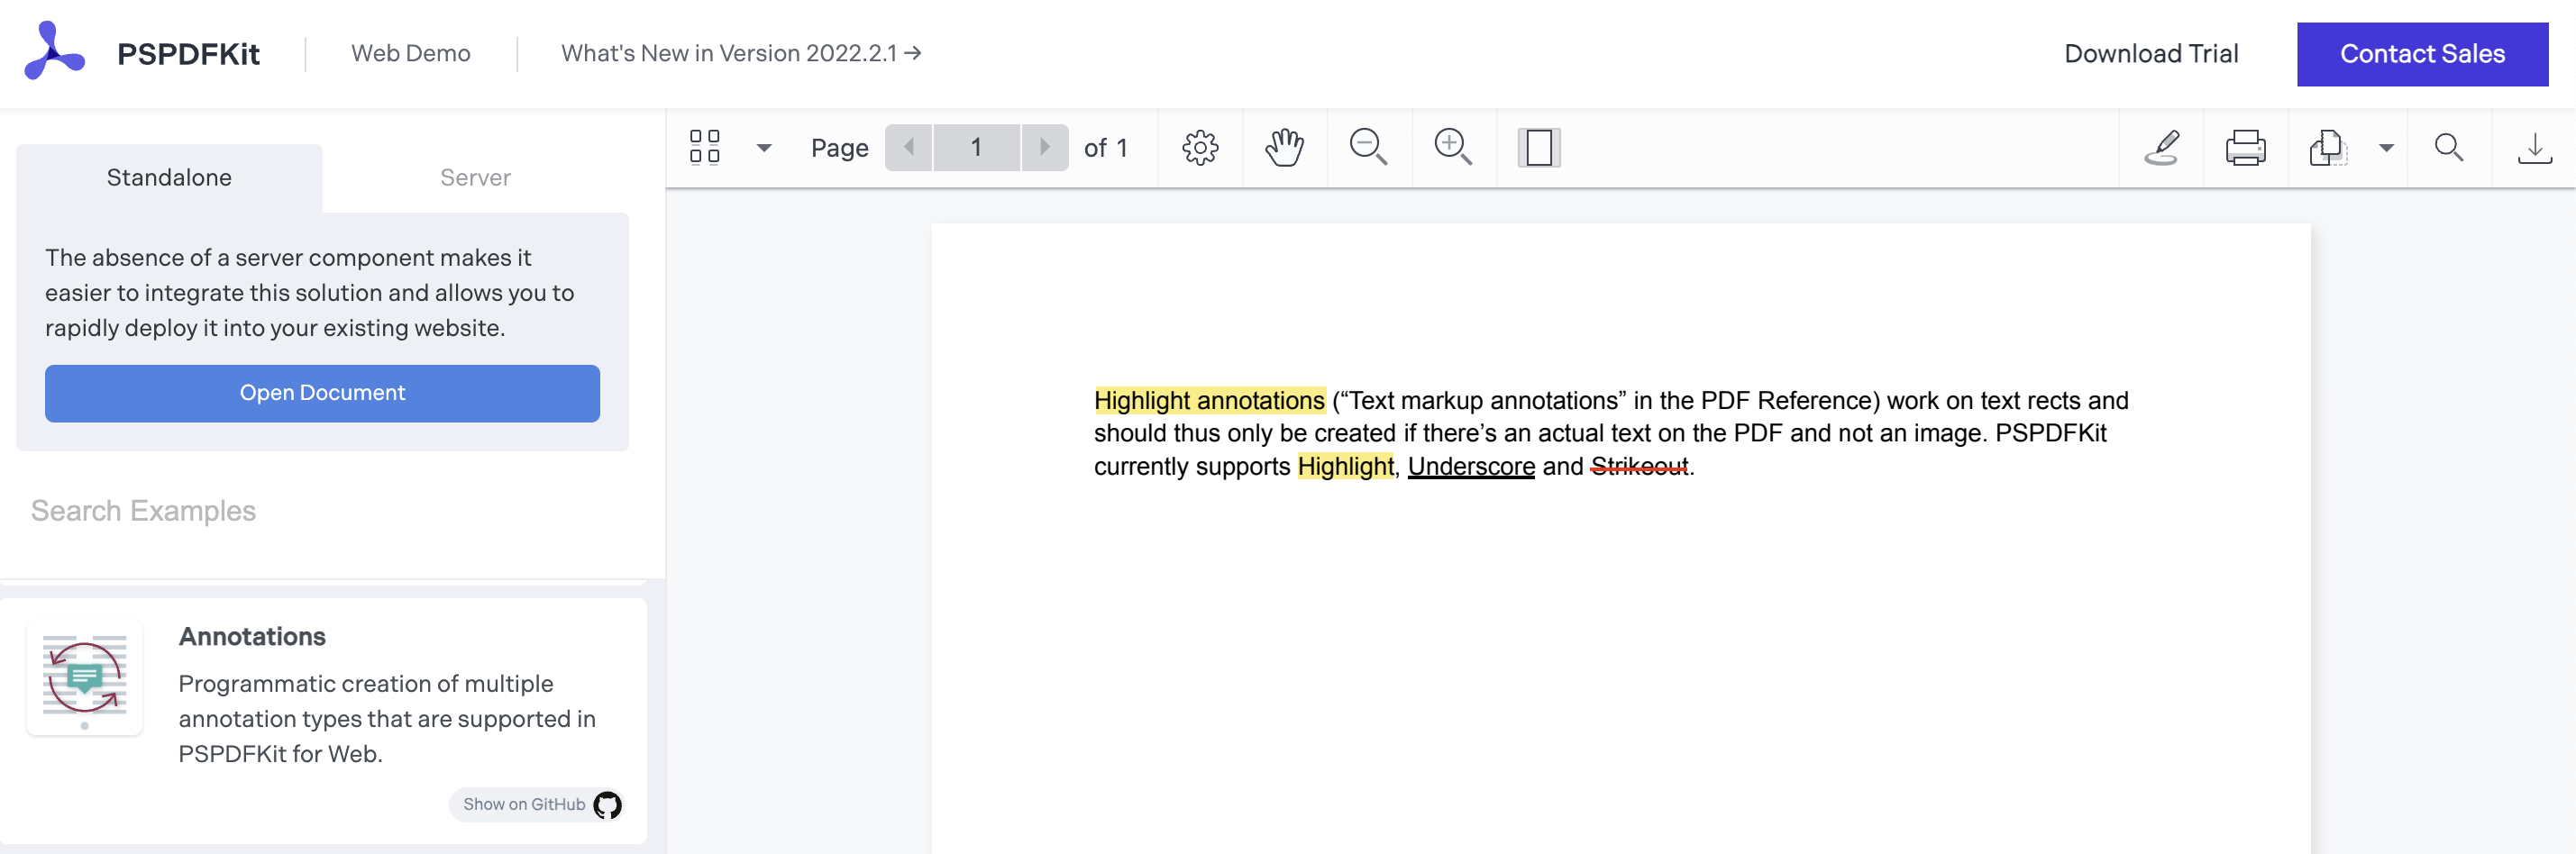 Text with highlighting, underlining, and strikeout annotations